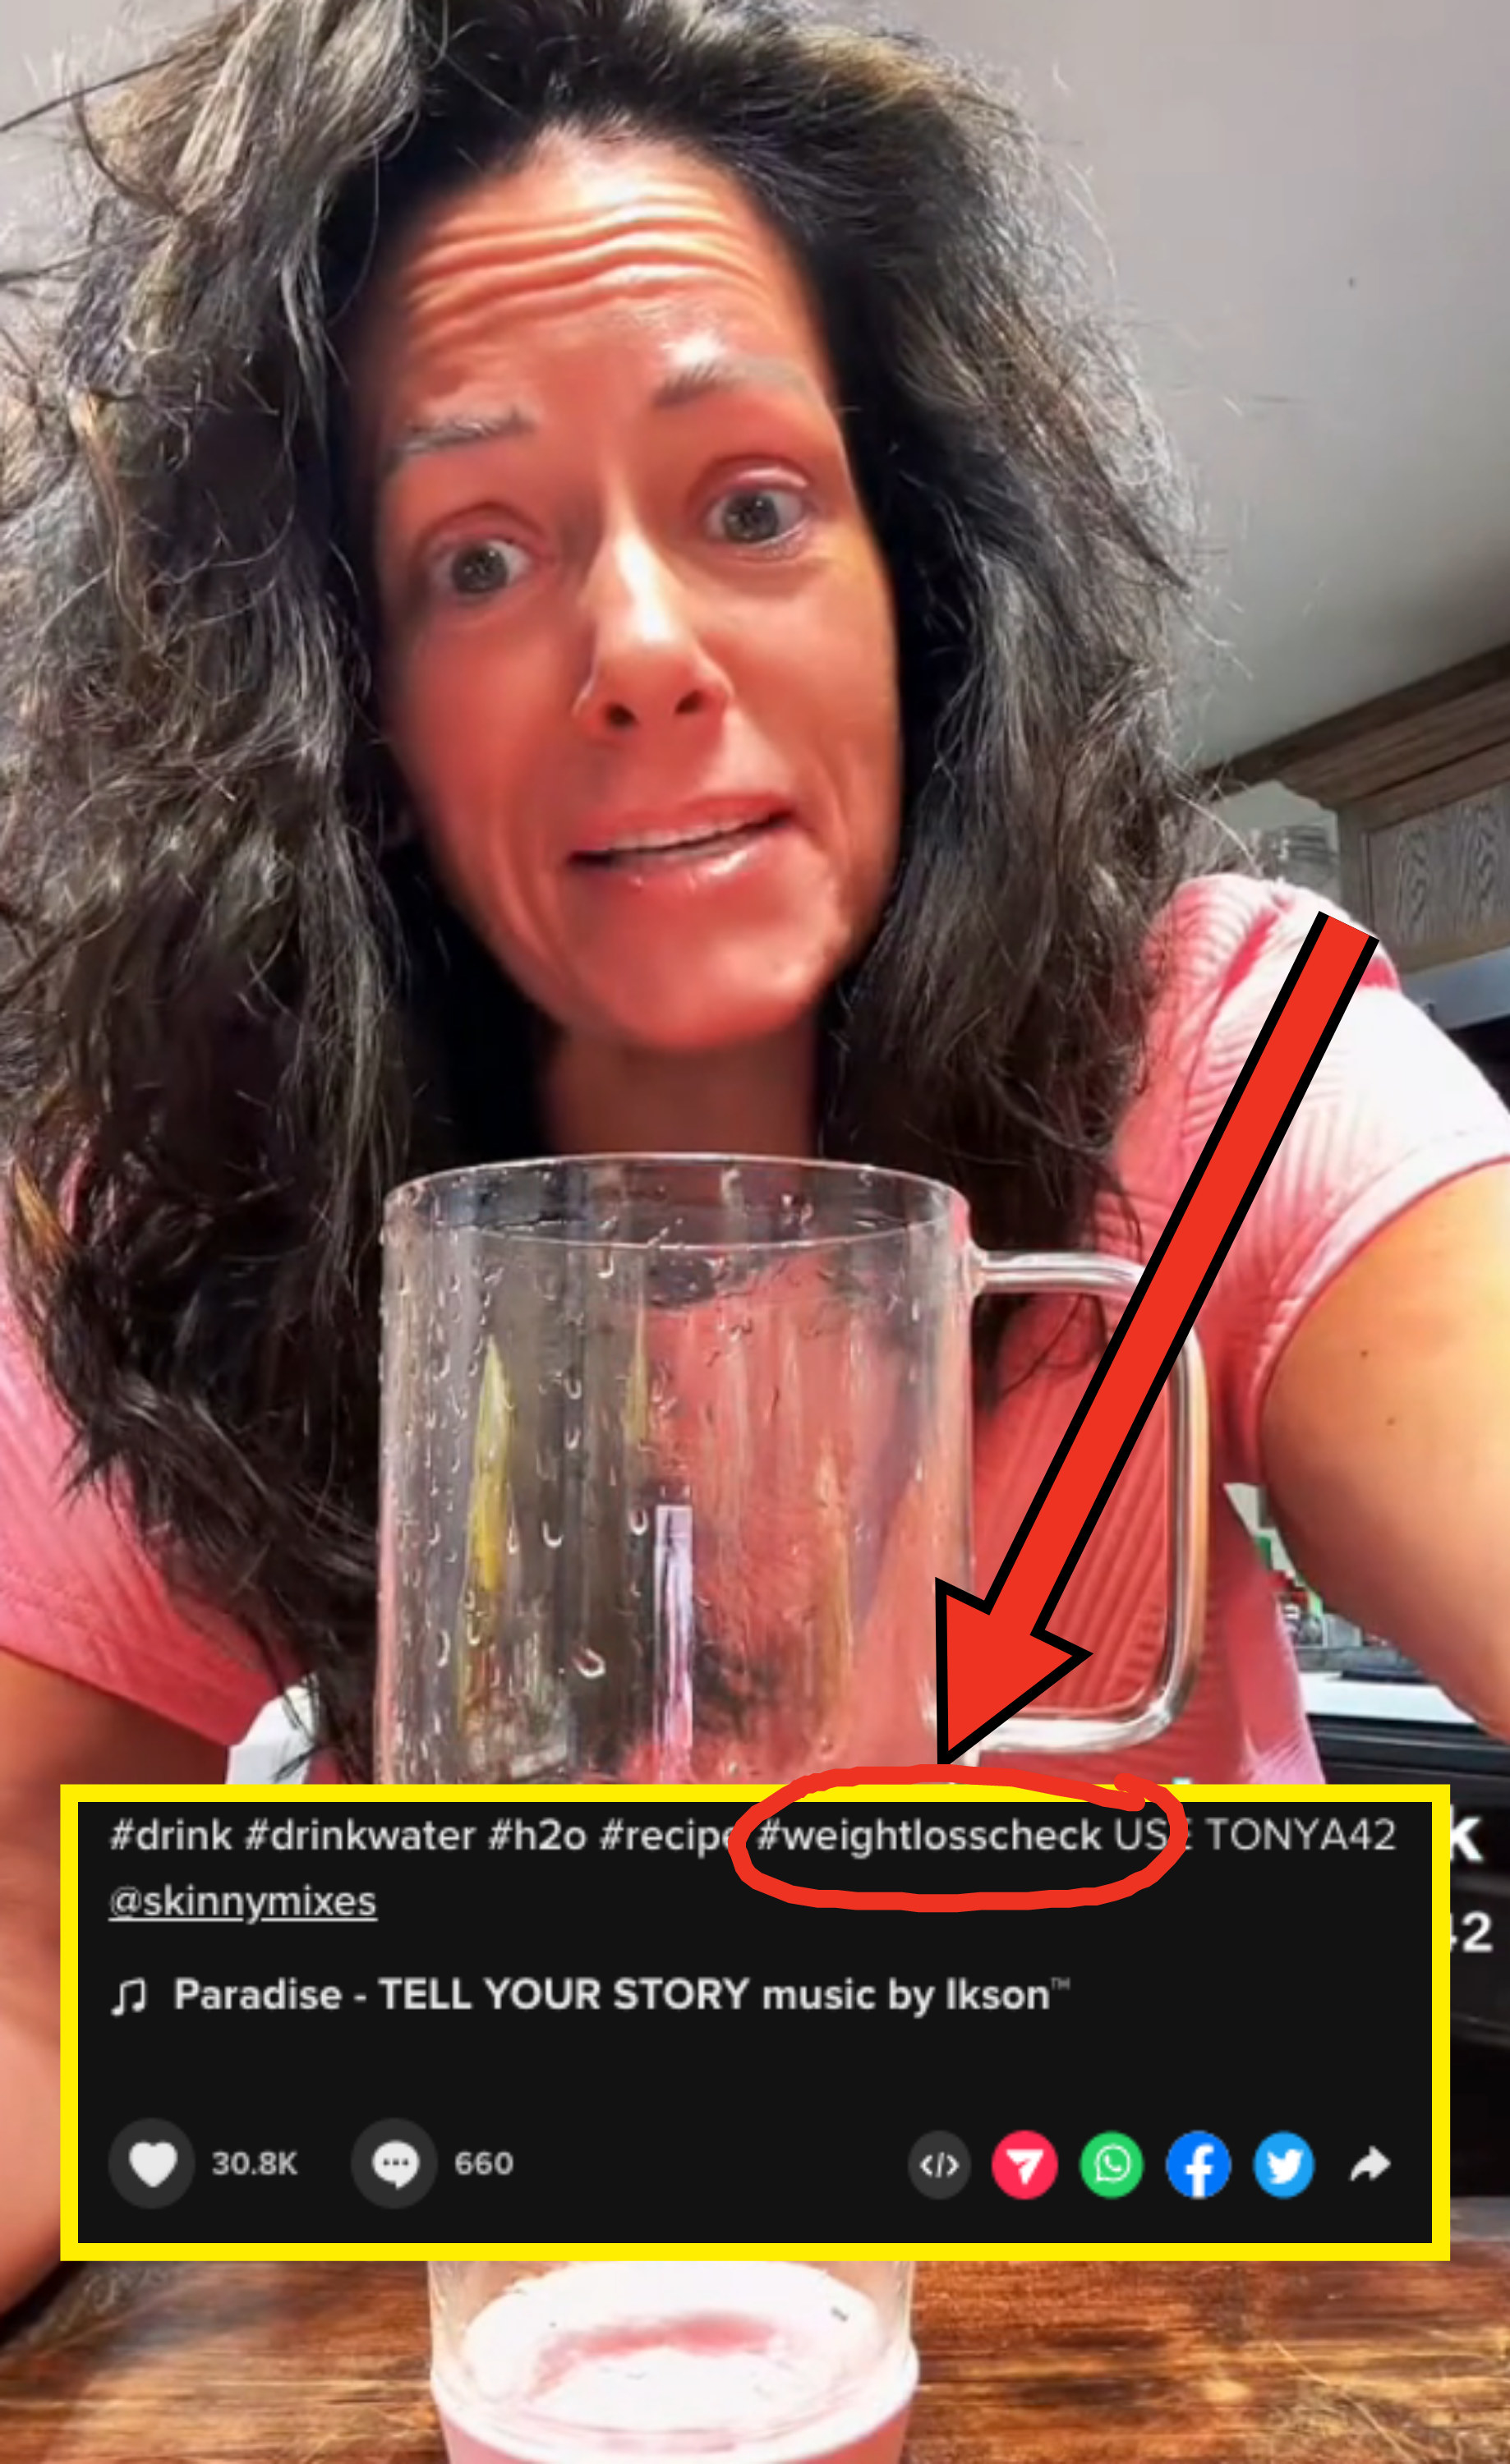 Tonya making a water recipe and the hashtag #weightlosscheck in the caption